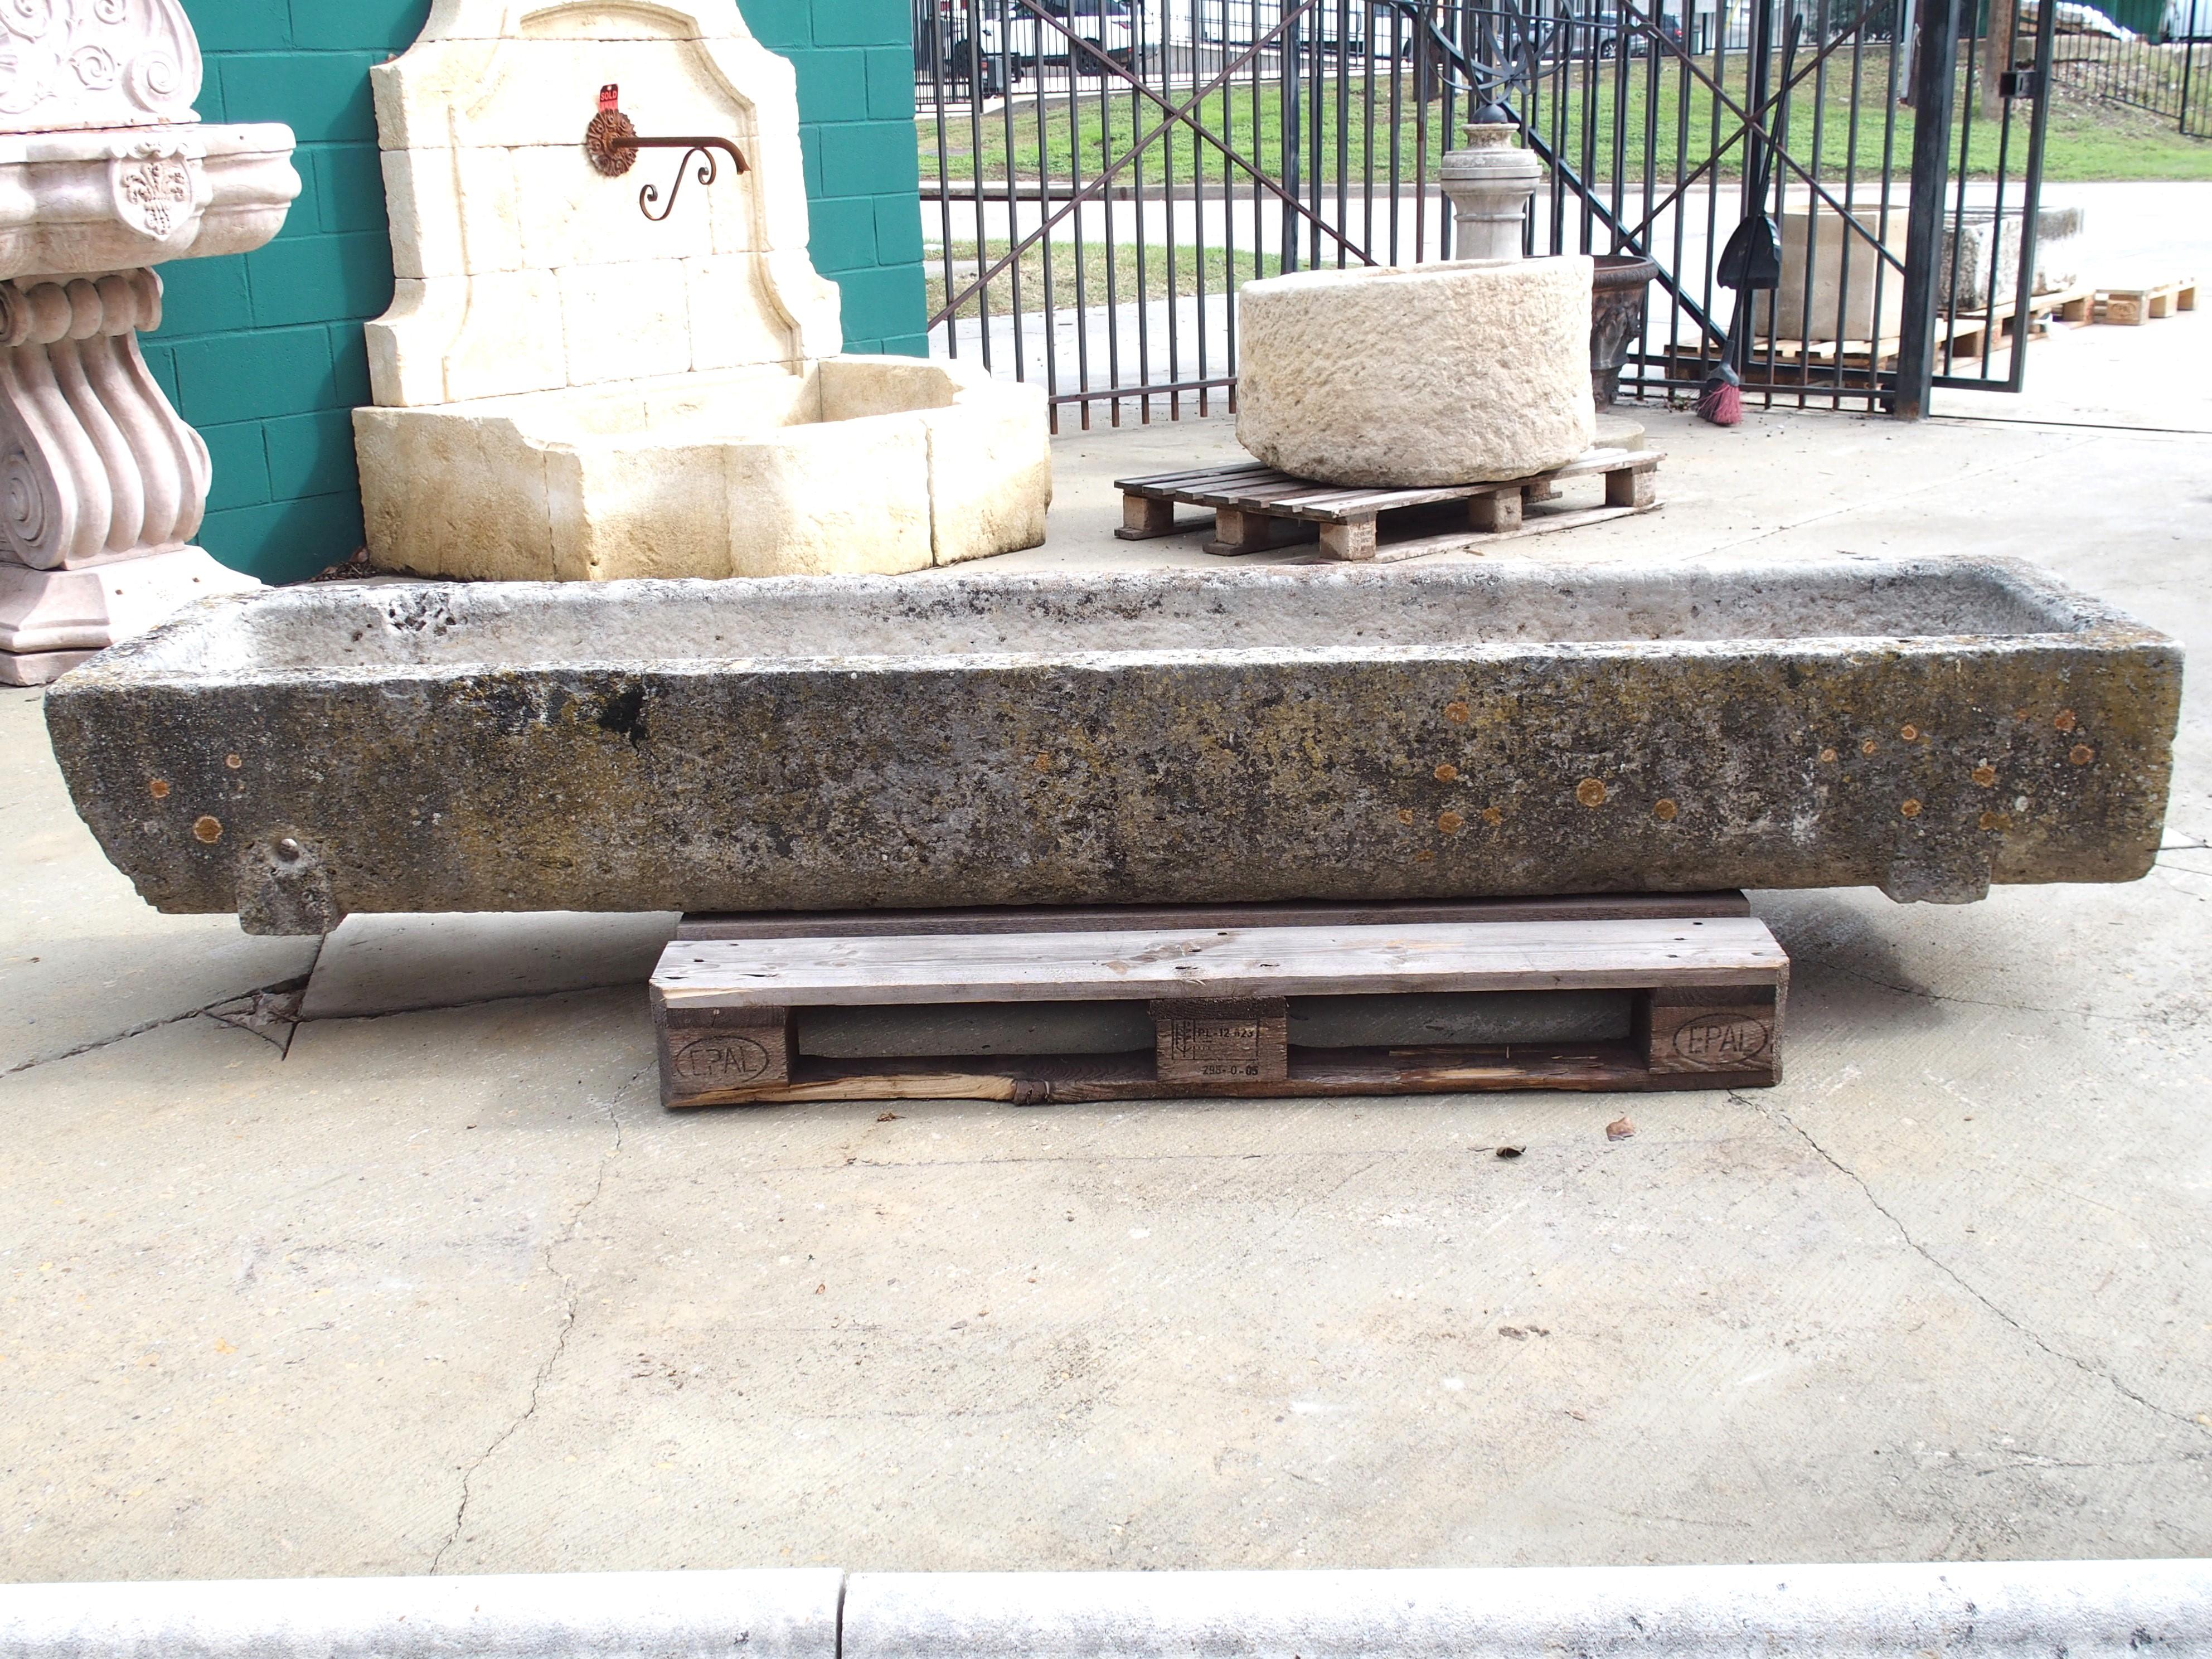 Hand-carved from one piece of stone in Burgundy, France, circa 1800, this trough is extremely long, with a length of 91 ½ inches! The gray stone has a magnificent patina consisting of a mottling of black, cream, and white, with traces of brown and